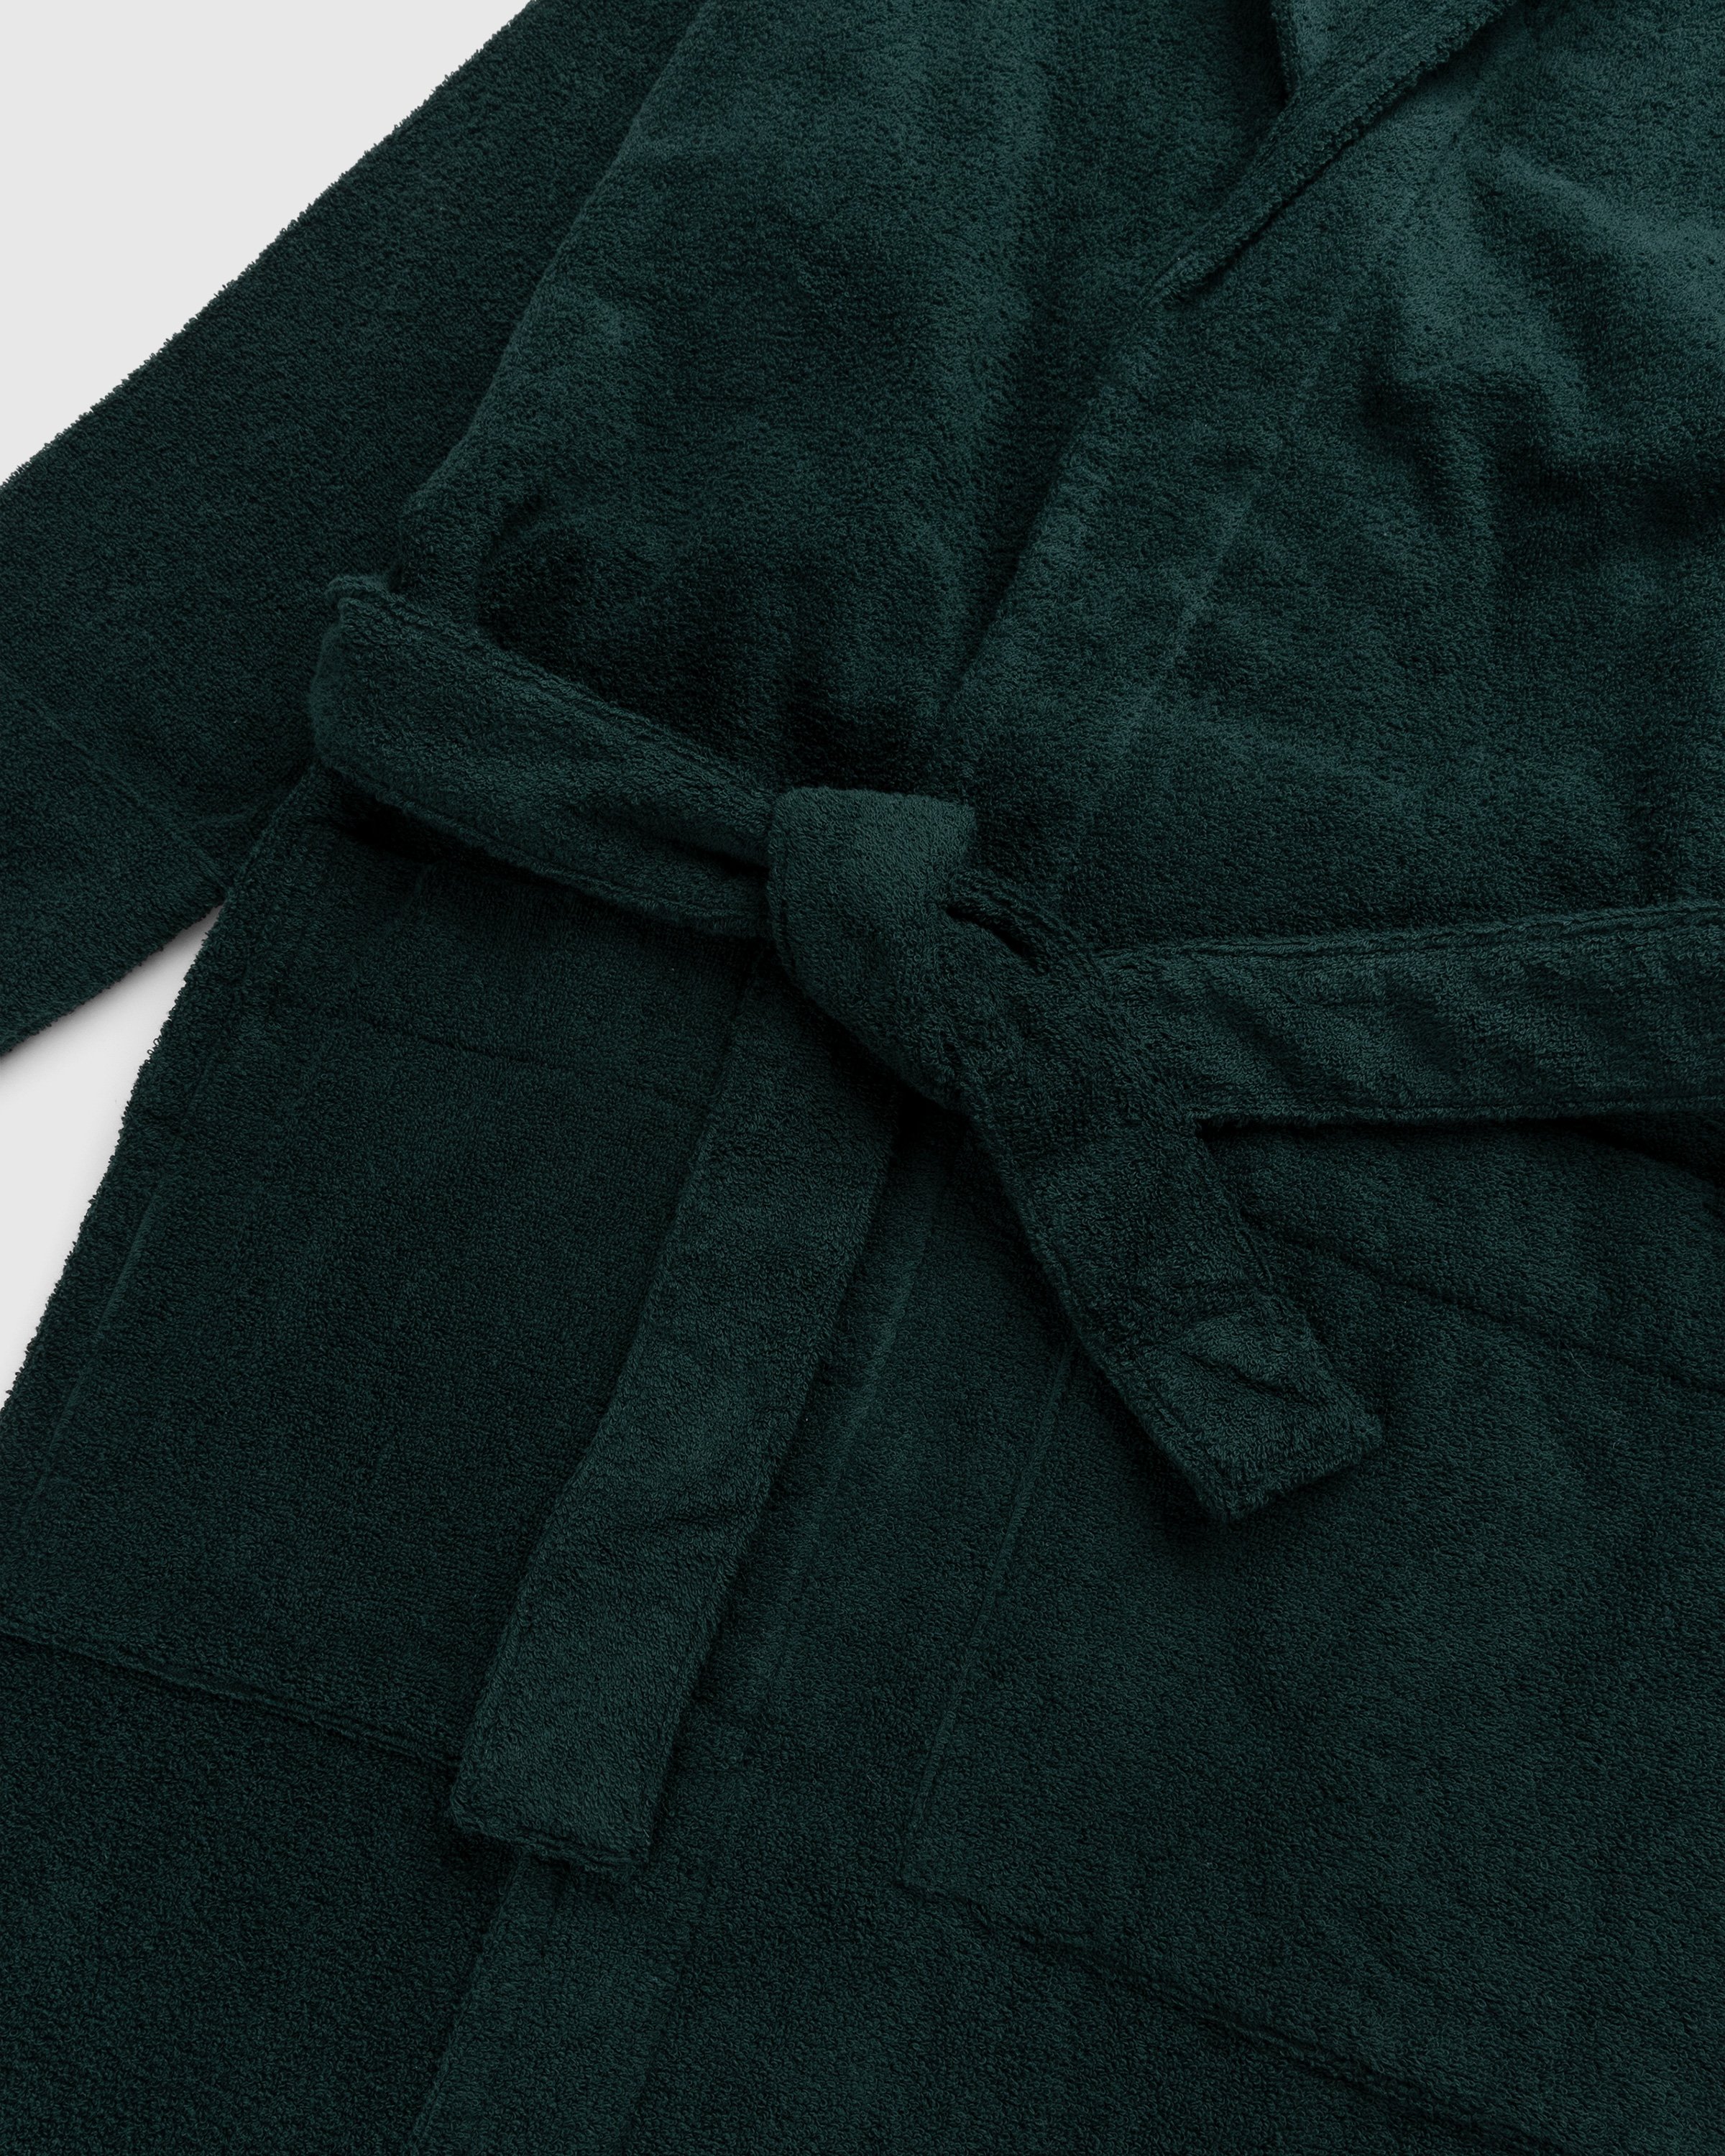 Tekla - Hooded Bathrobe Solid Forest Green - Lifestyle - Green - Image 6